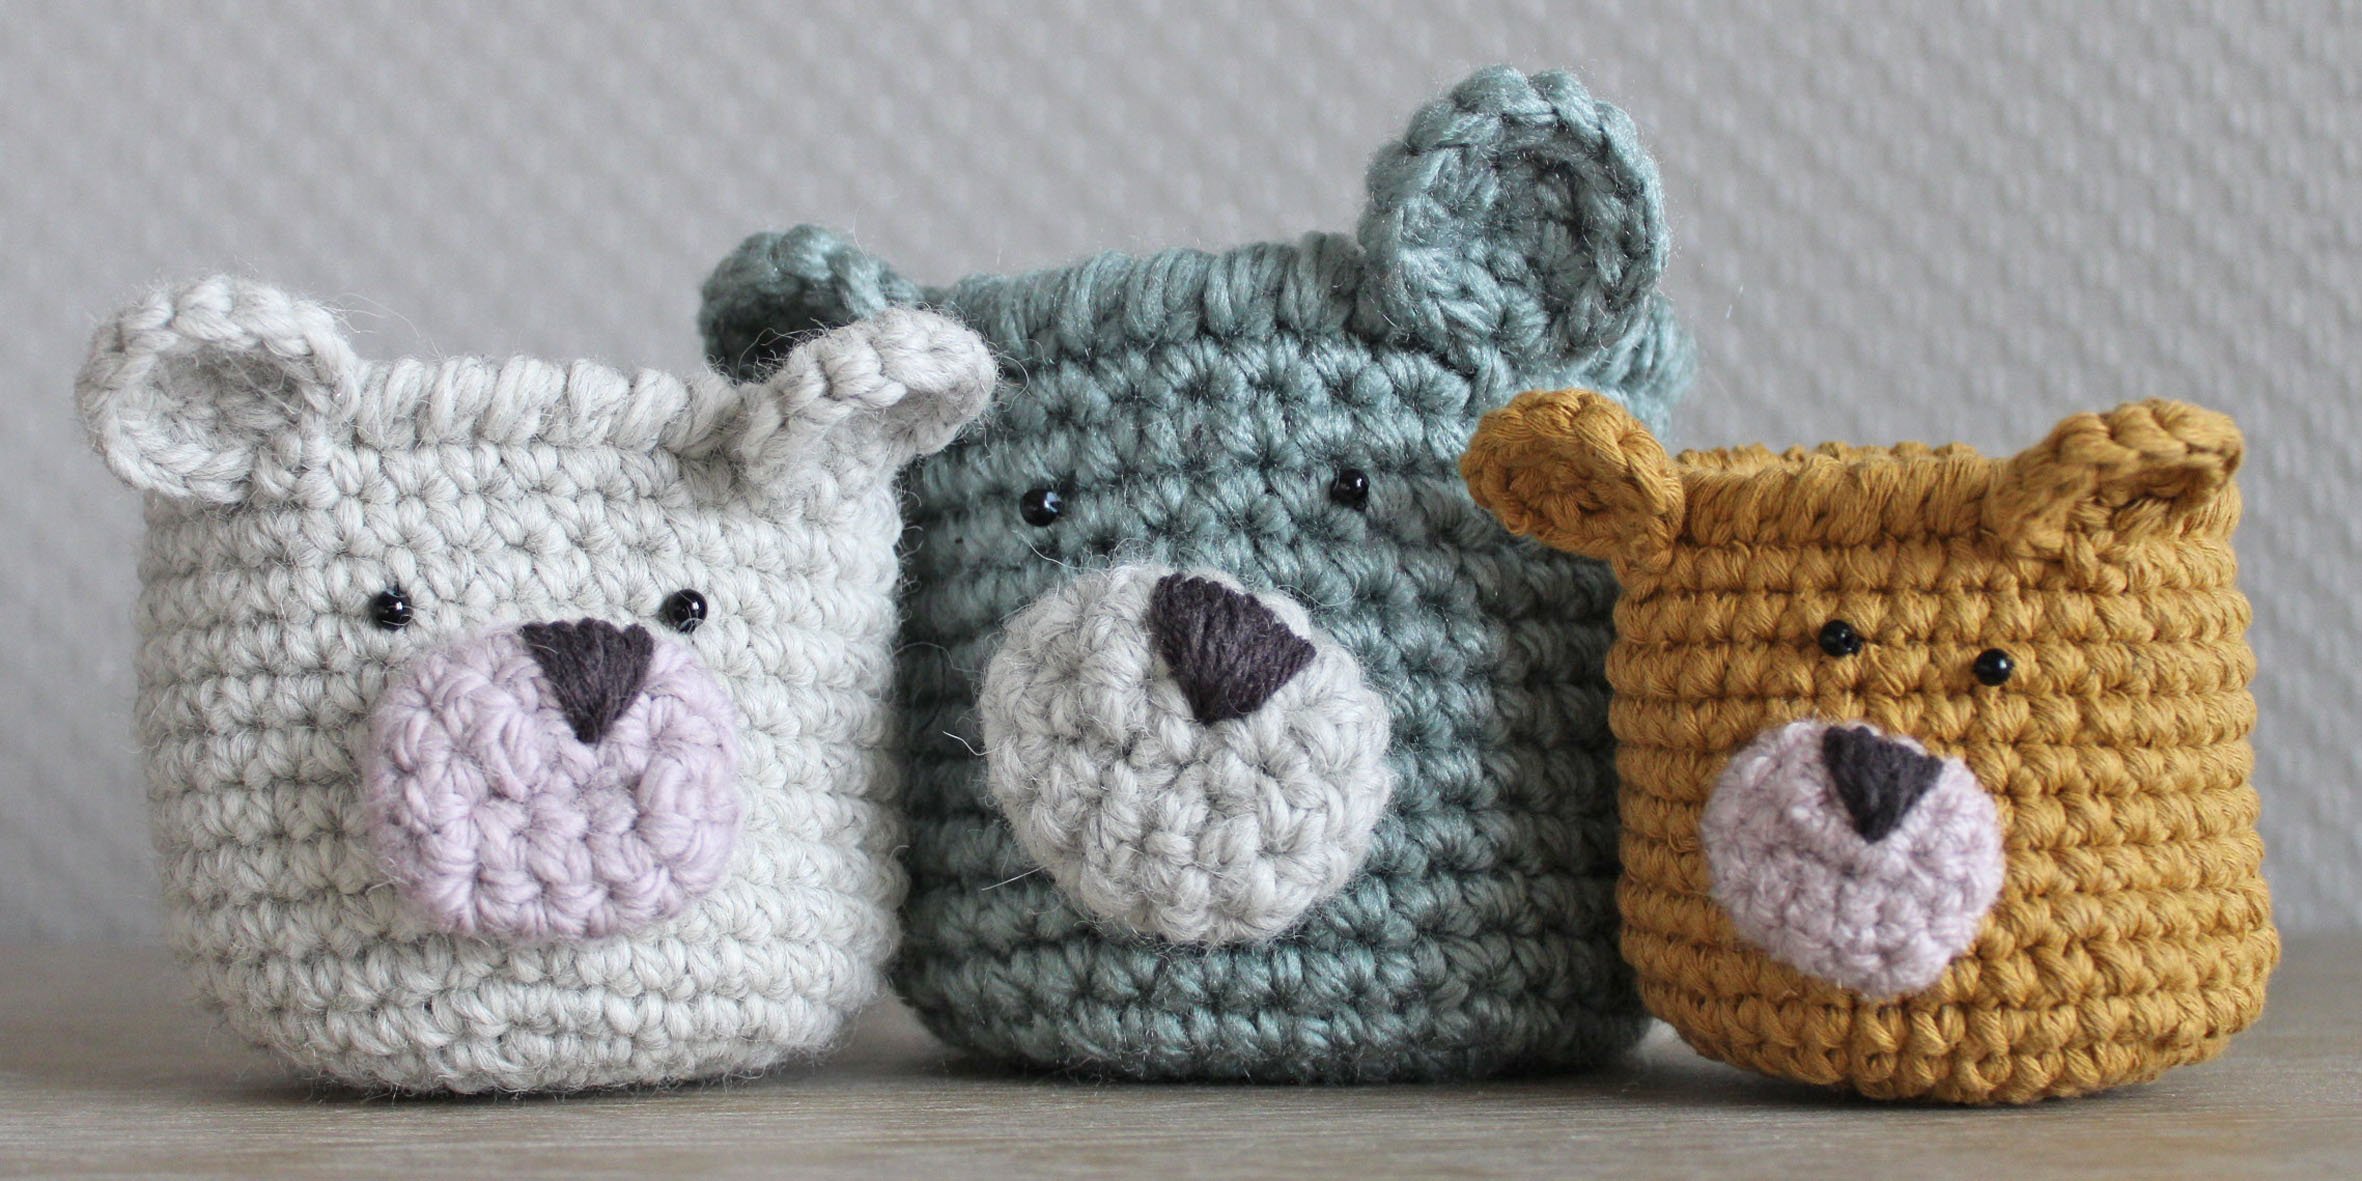 Beginners & Beyond Crochet-Along | and the Three Bears Baskets (1 or 2 Weeks)